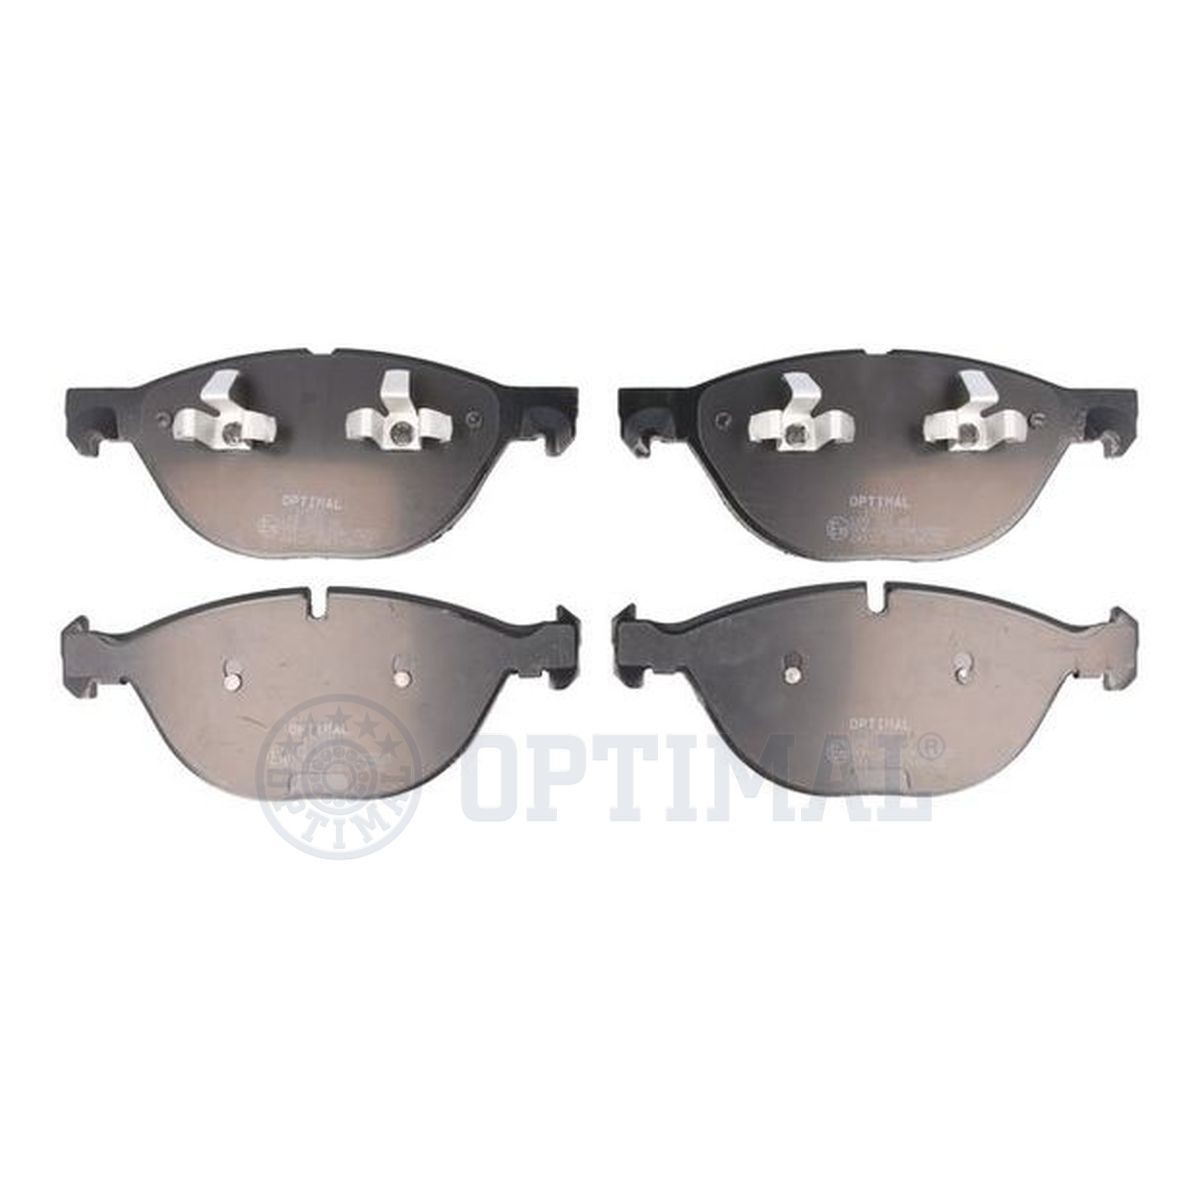 OPTIMAL 12510 Brake pad set Front Axle, prepared for wear indicator, excl. wear warning contact